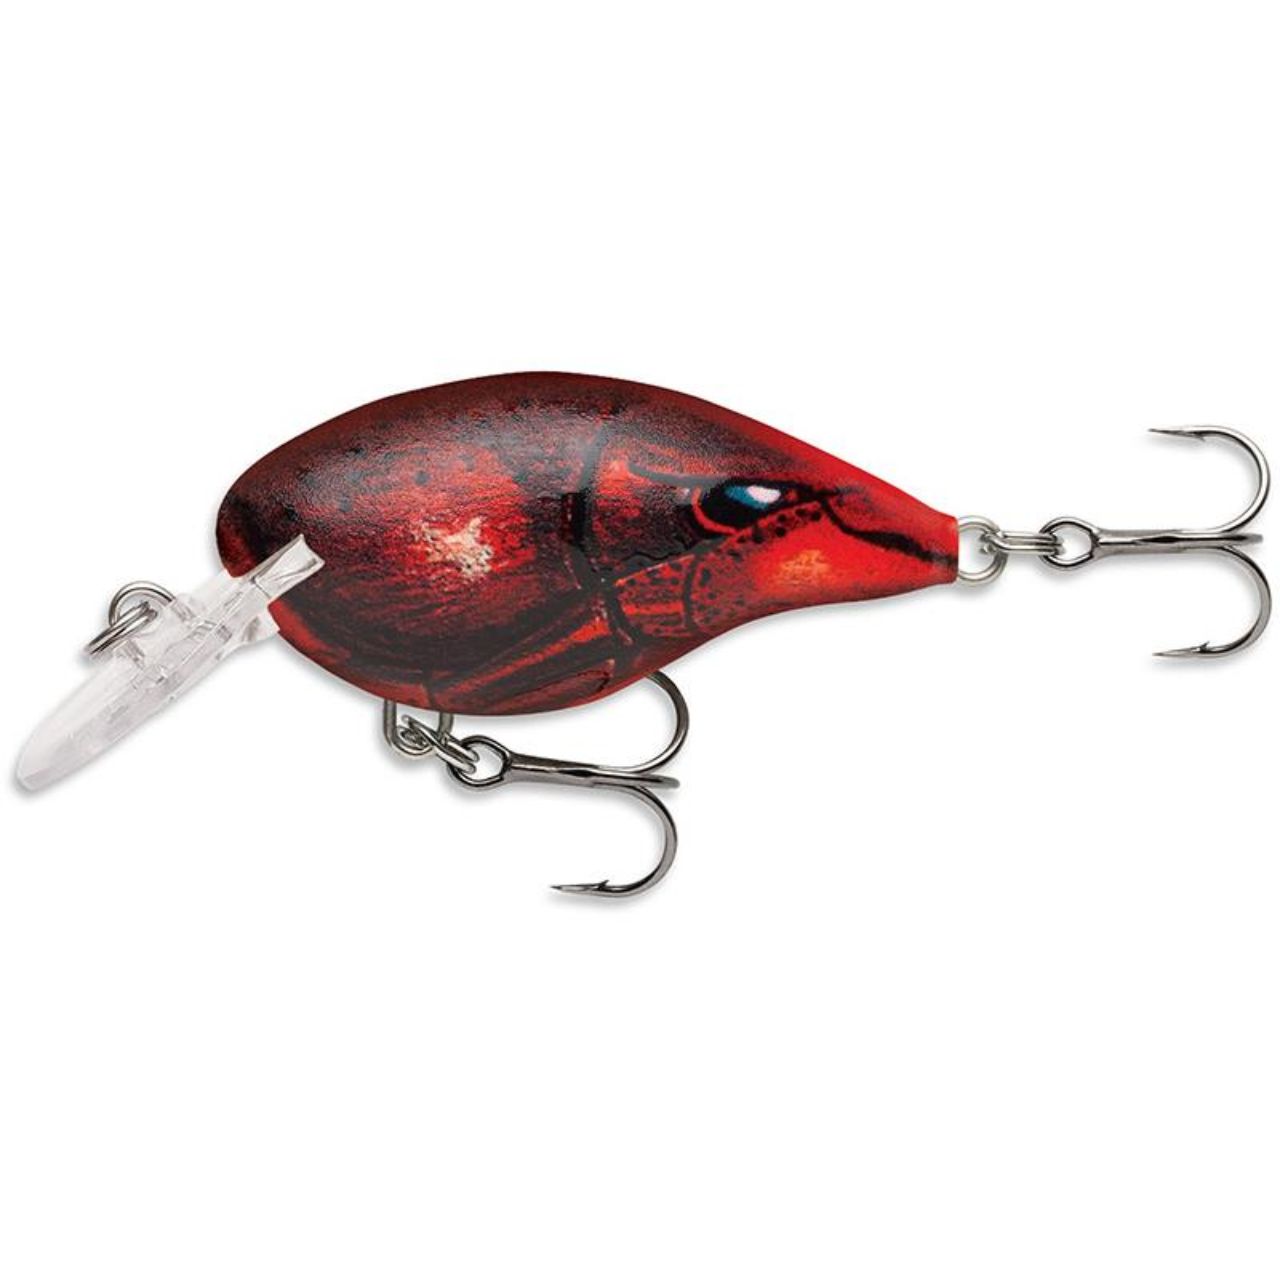 RAPALA DIVES-TO DT 14 RA5820238.jpg